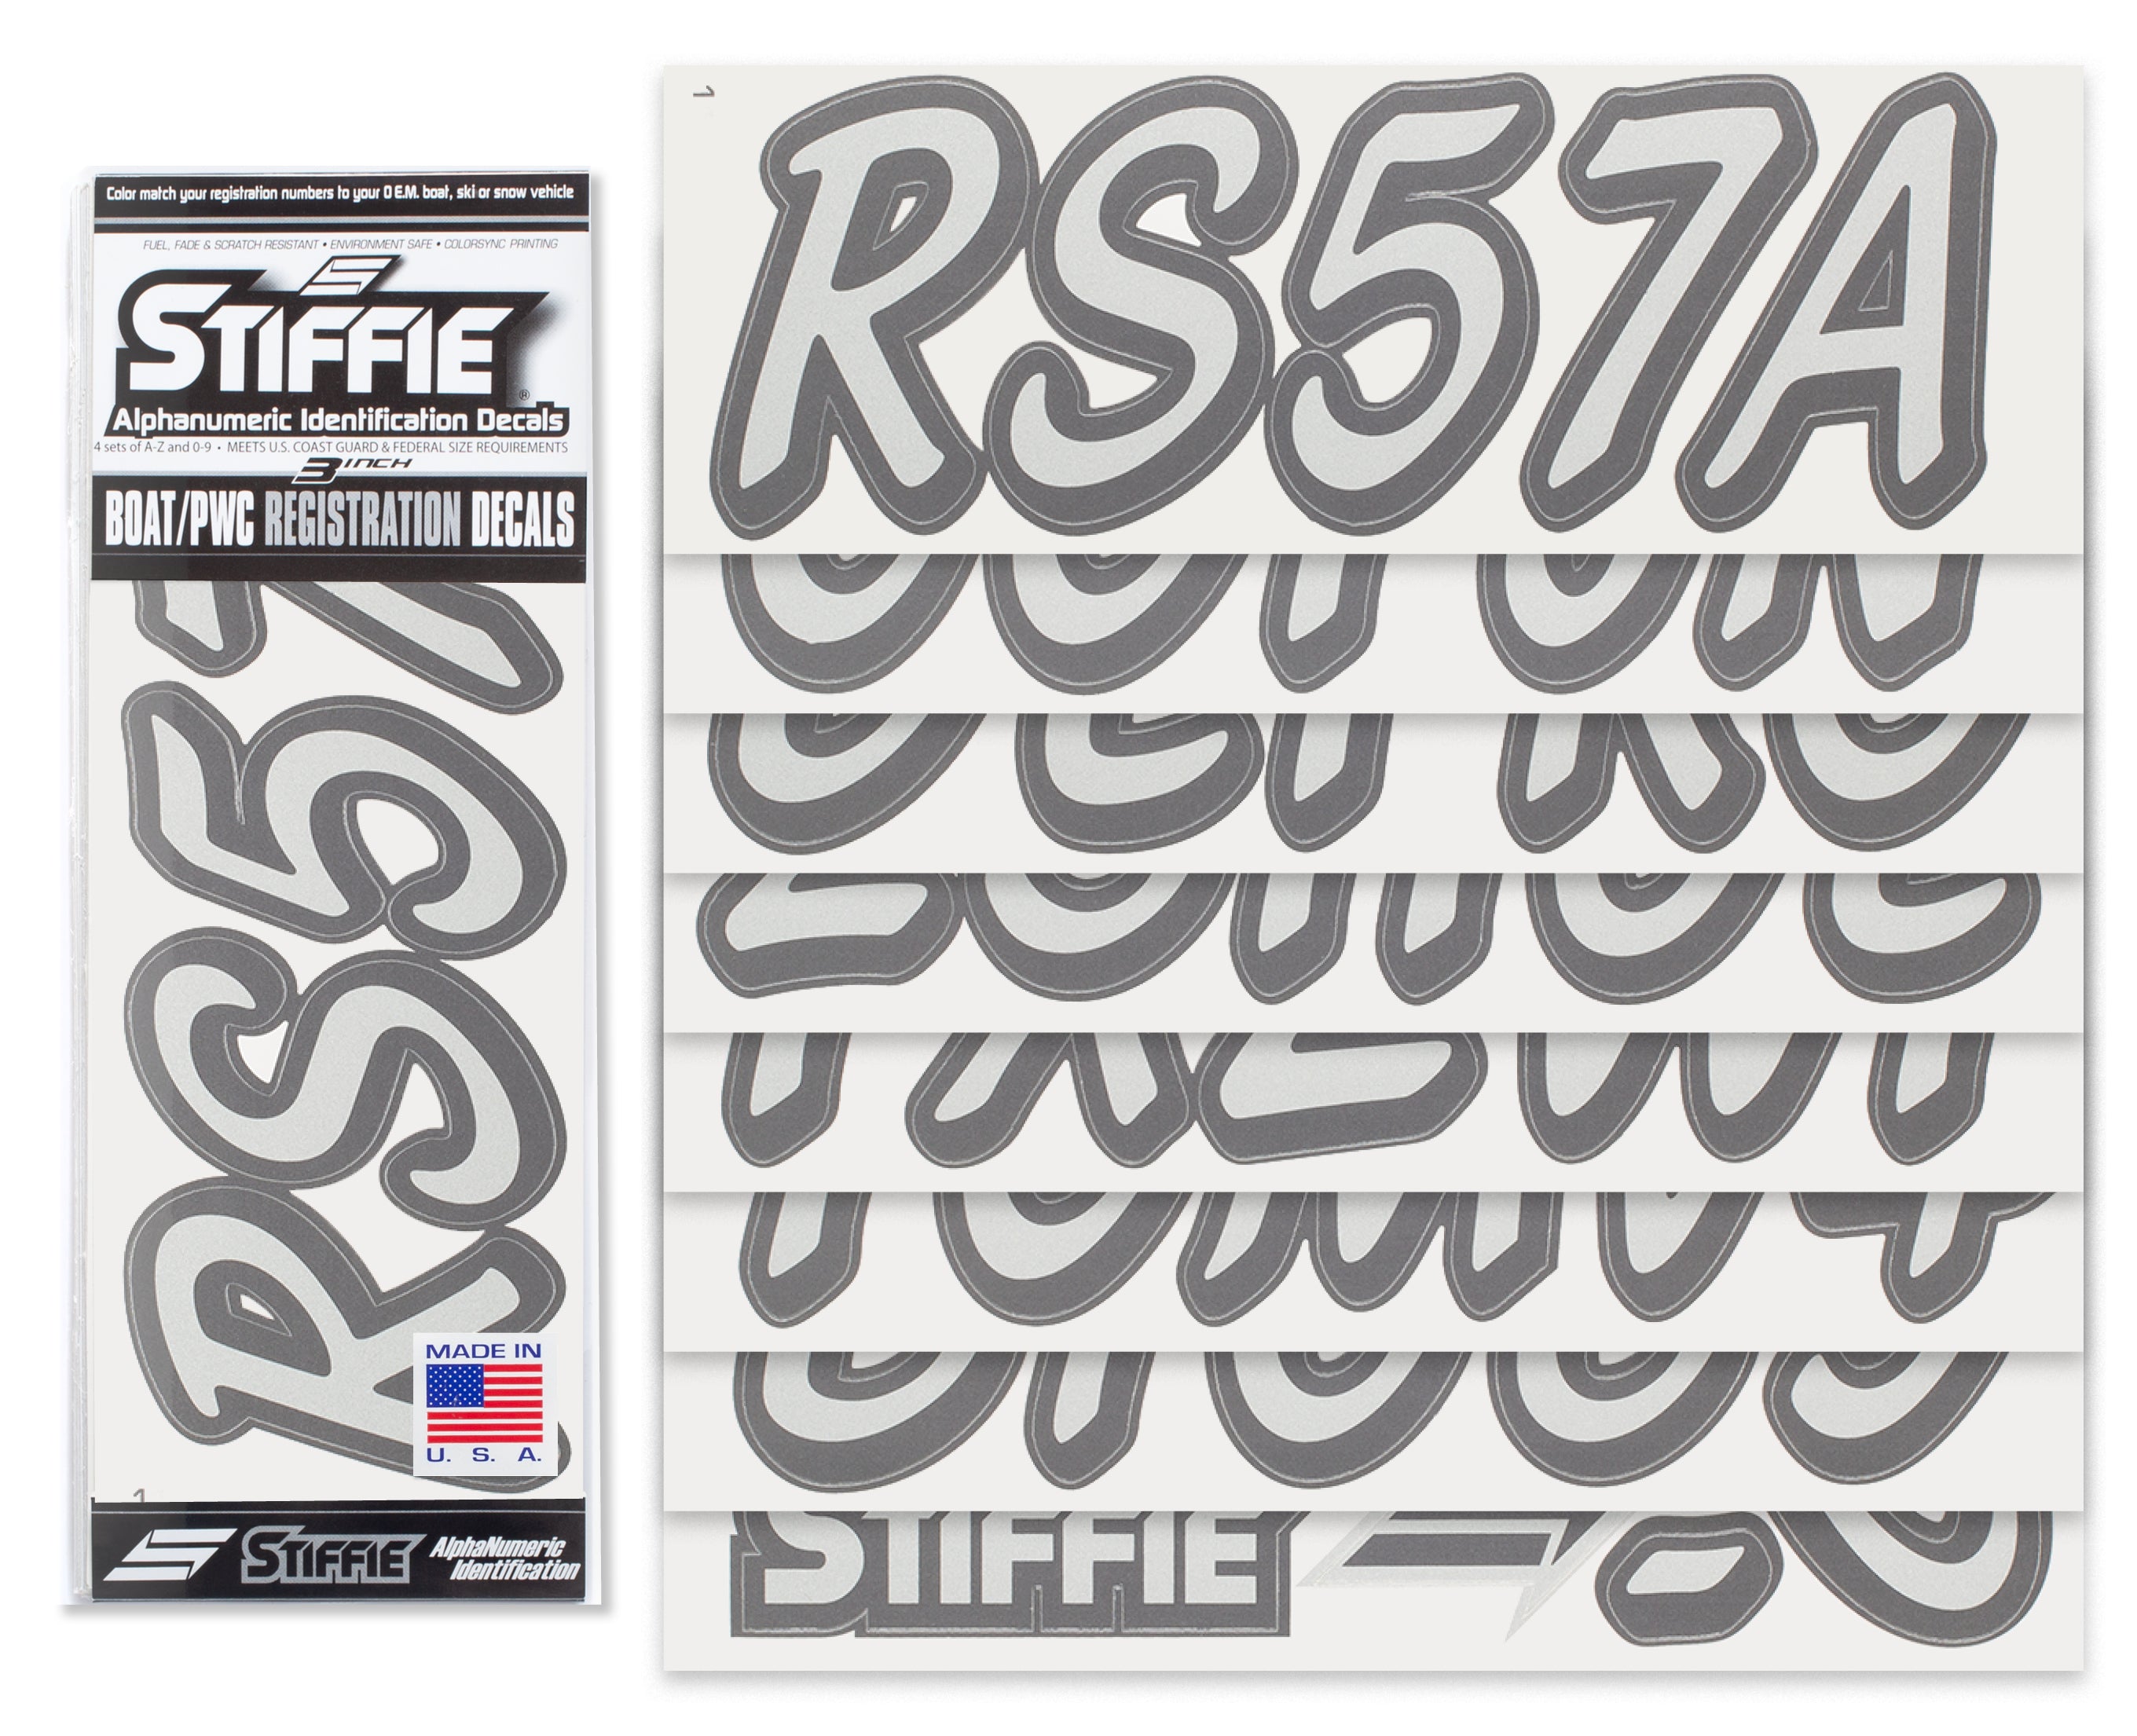 STIFFIE Whipline Solid Metallic Silver/Carbon 3" Alpha-Numeric Registration Identification Numbers Stickers Decals for Boats & Personal Watercraft